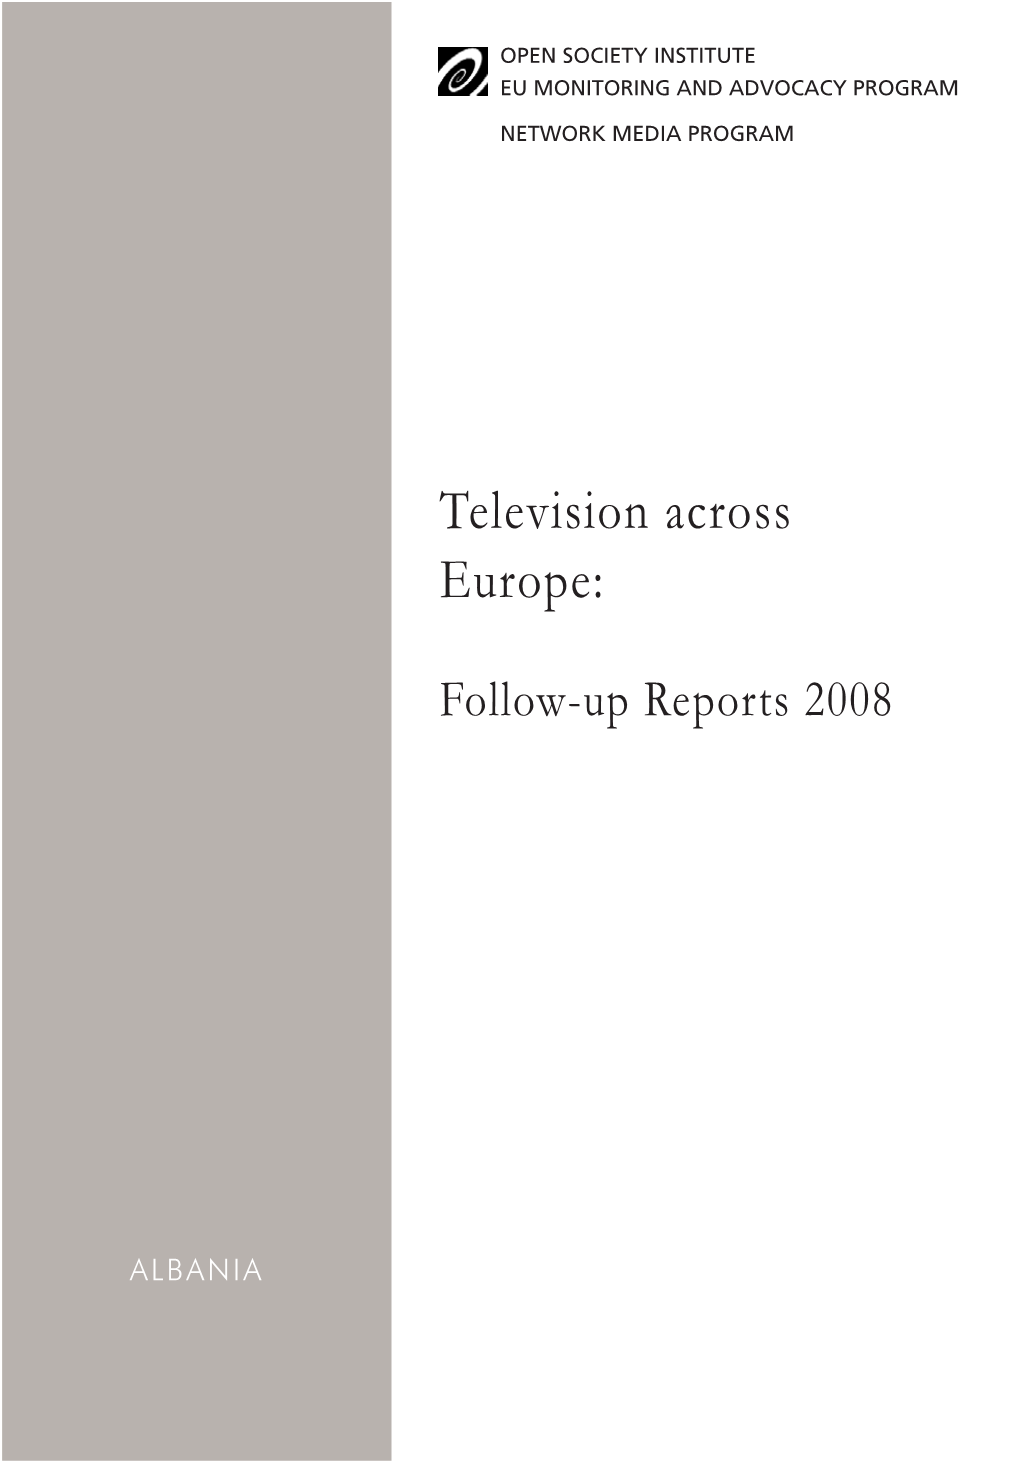 Television Across Europe: Follow-Up Reports 2008’